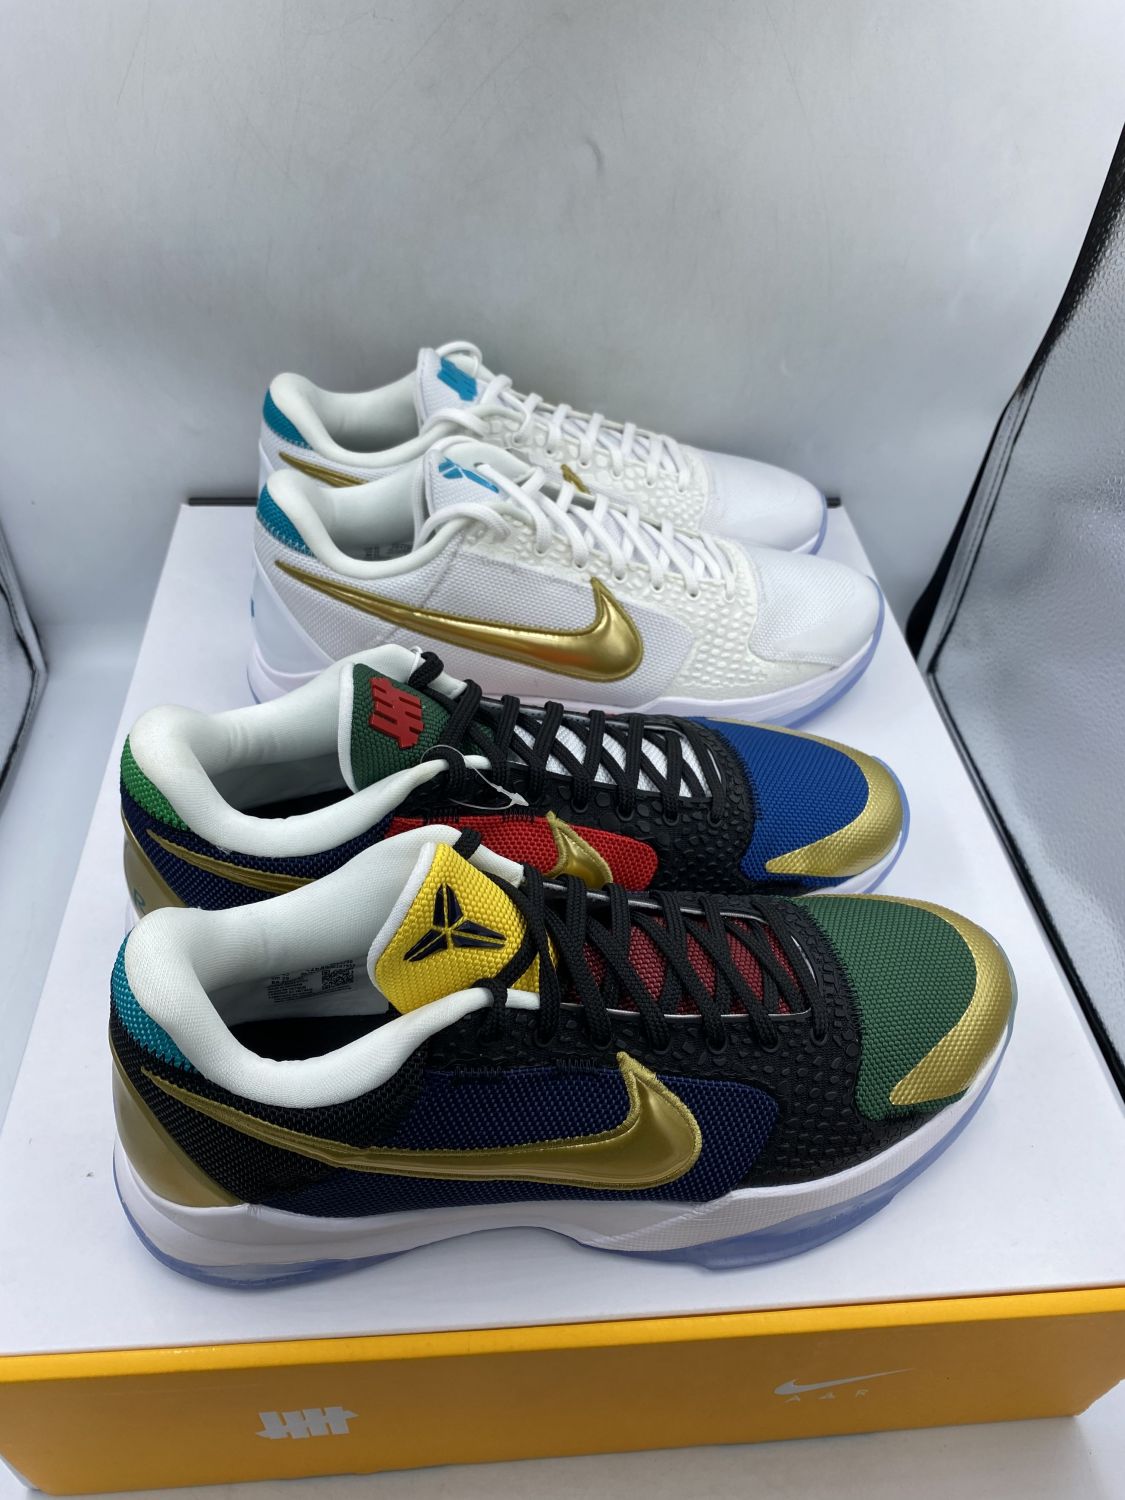 Nike Kobe 5 Protro Undefeated What If Pack | AfterMarket